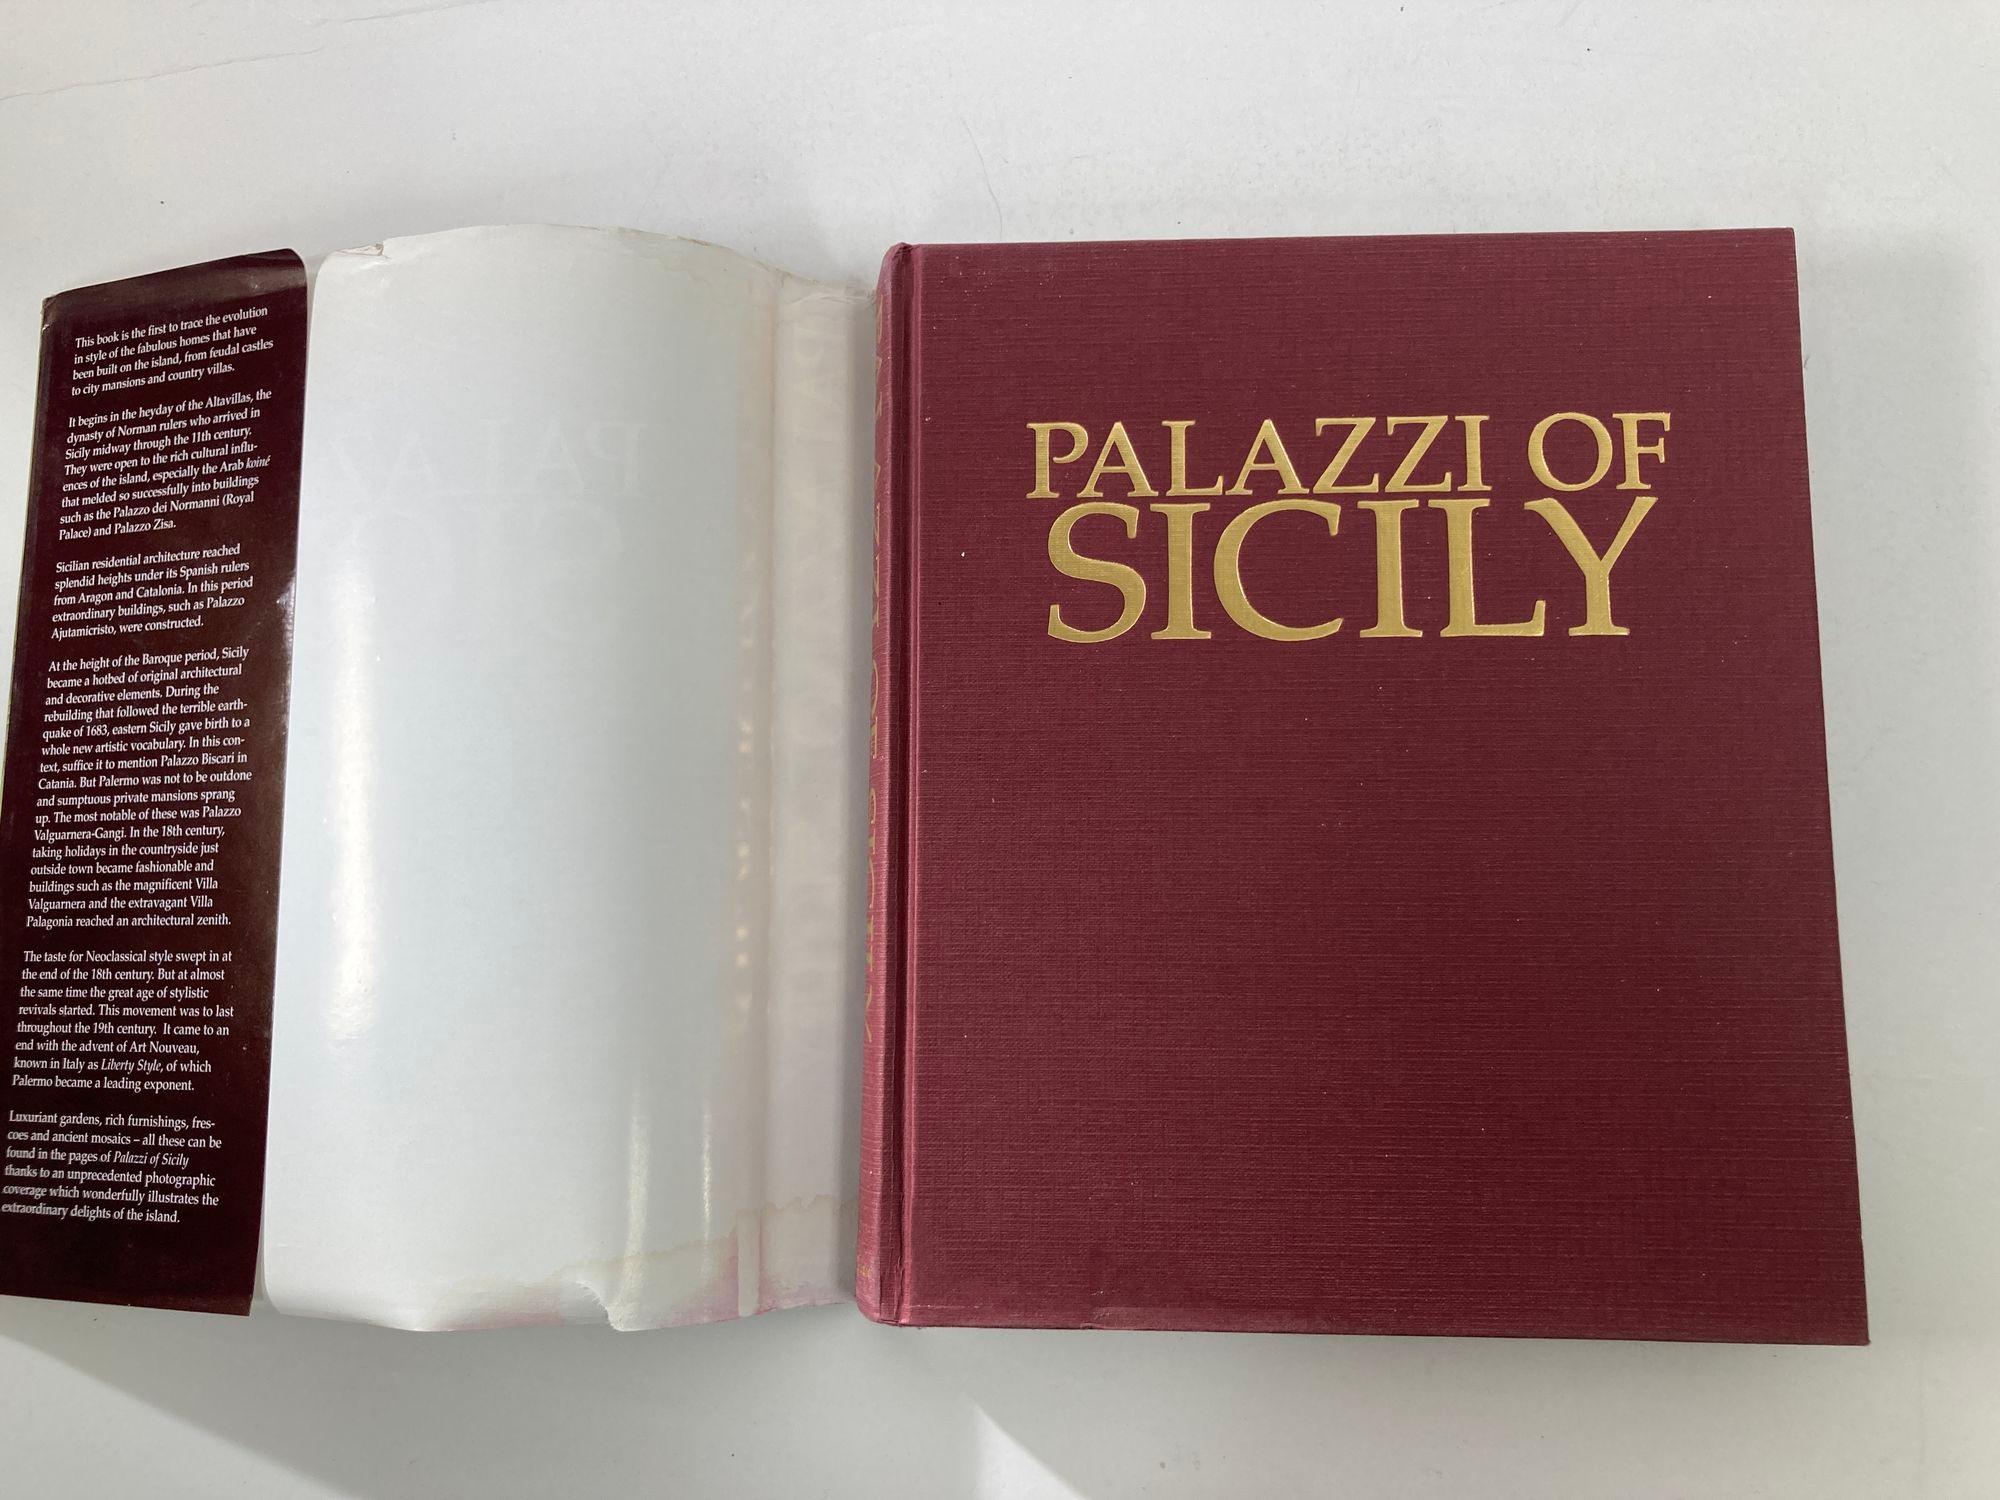 Palazzi of Sicily by Angheli Zalapi Hardcover Book, Italy In Good Condition For Sale In North Hollywood, CA